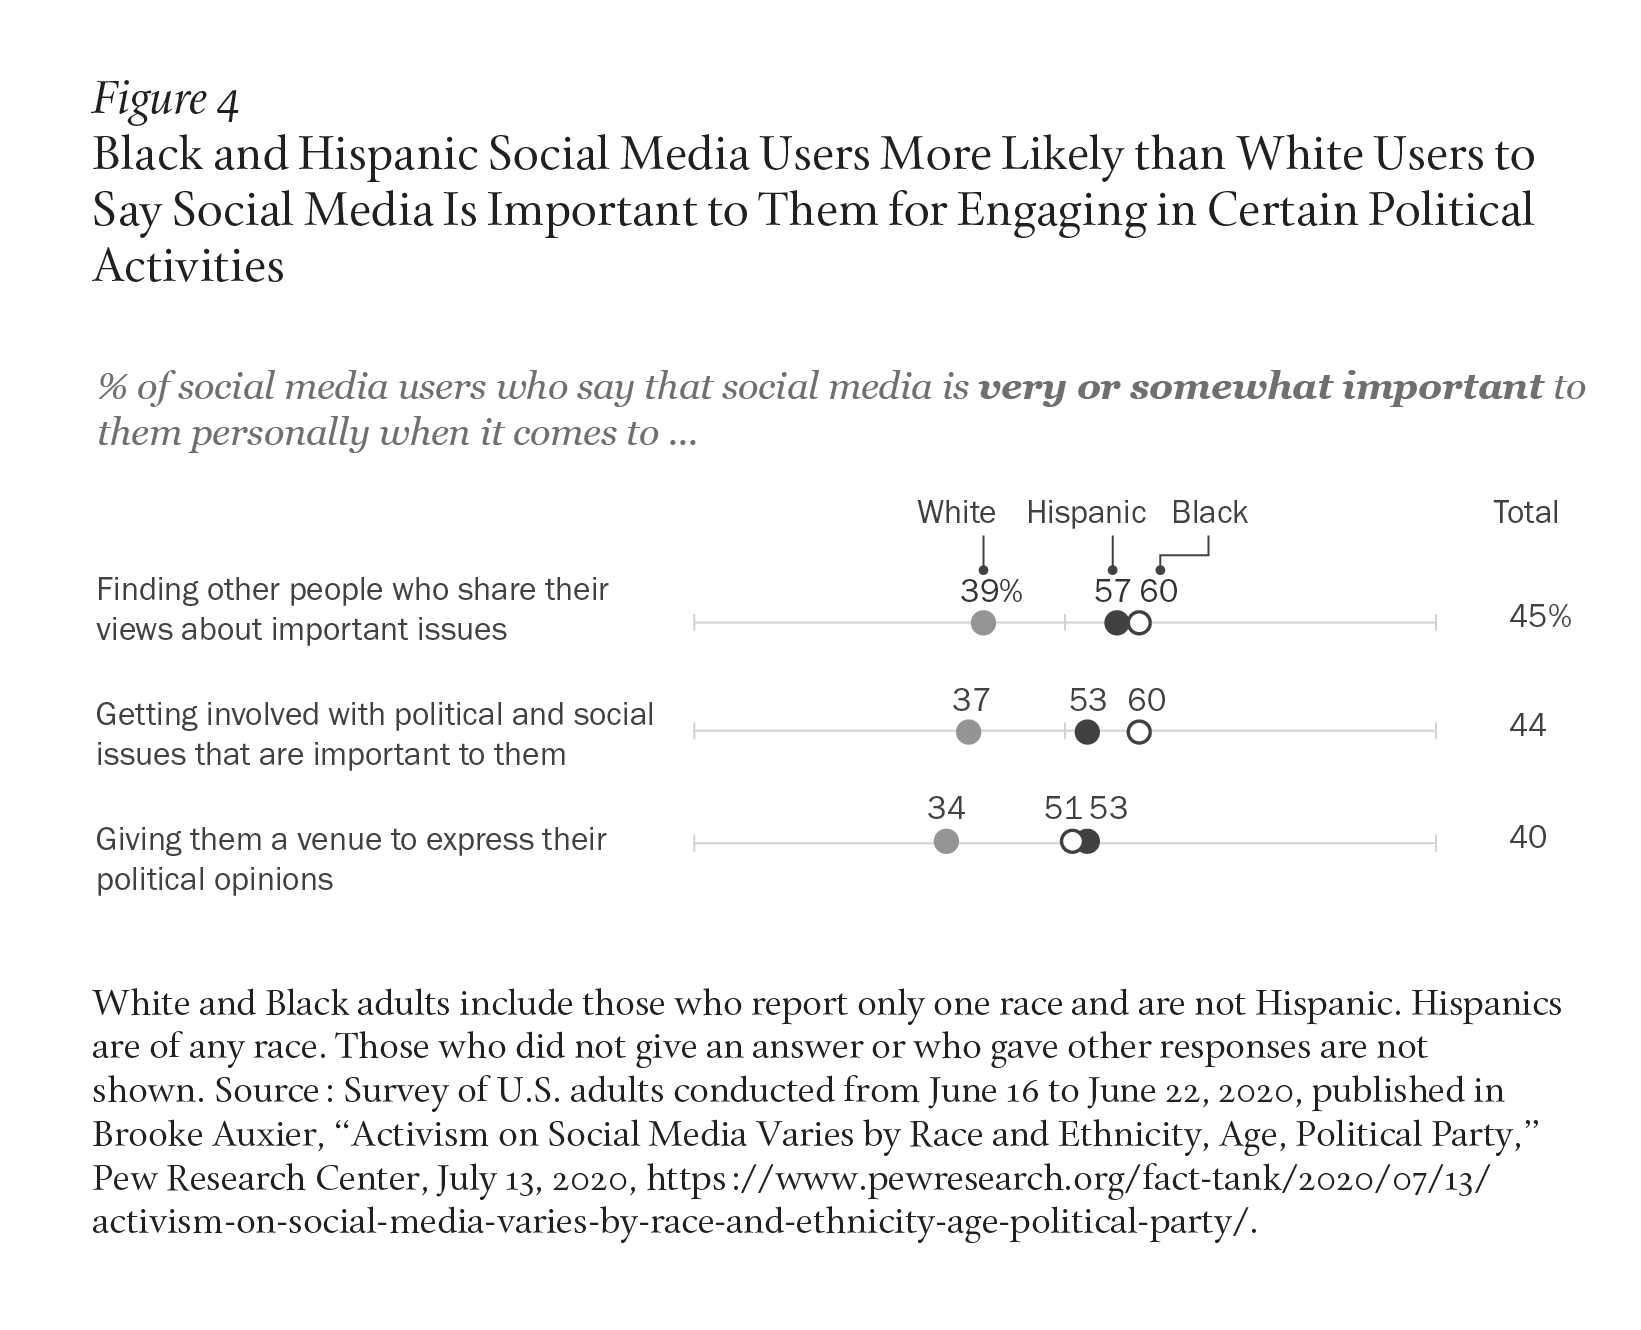 Compared with White people, higher rates of Black and Hispanic people find other people on social media who share their views about important issues (Black: 60%, Hispanic: 57%, White: 39%), get involved with political and social issues that matter to them (Black: 60%, Hispanic: 53%, White: 37%), and use it as a venue to express their political opinions (Black: 51%, Hispanic: 53%, White: 34%). Source: Pew Research Center, “Activism on Social Media Varies by Race and Ethnicity, Age, Political Party."